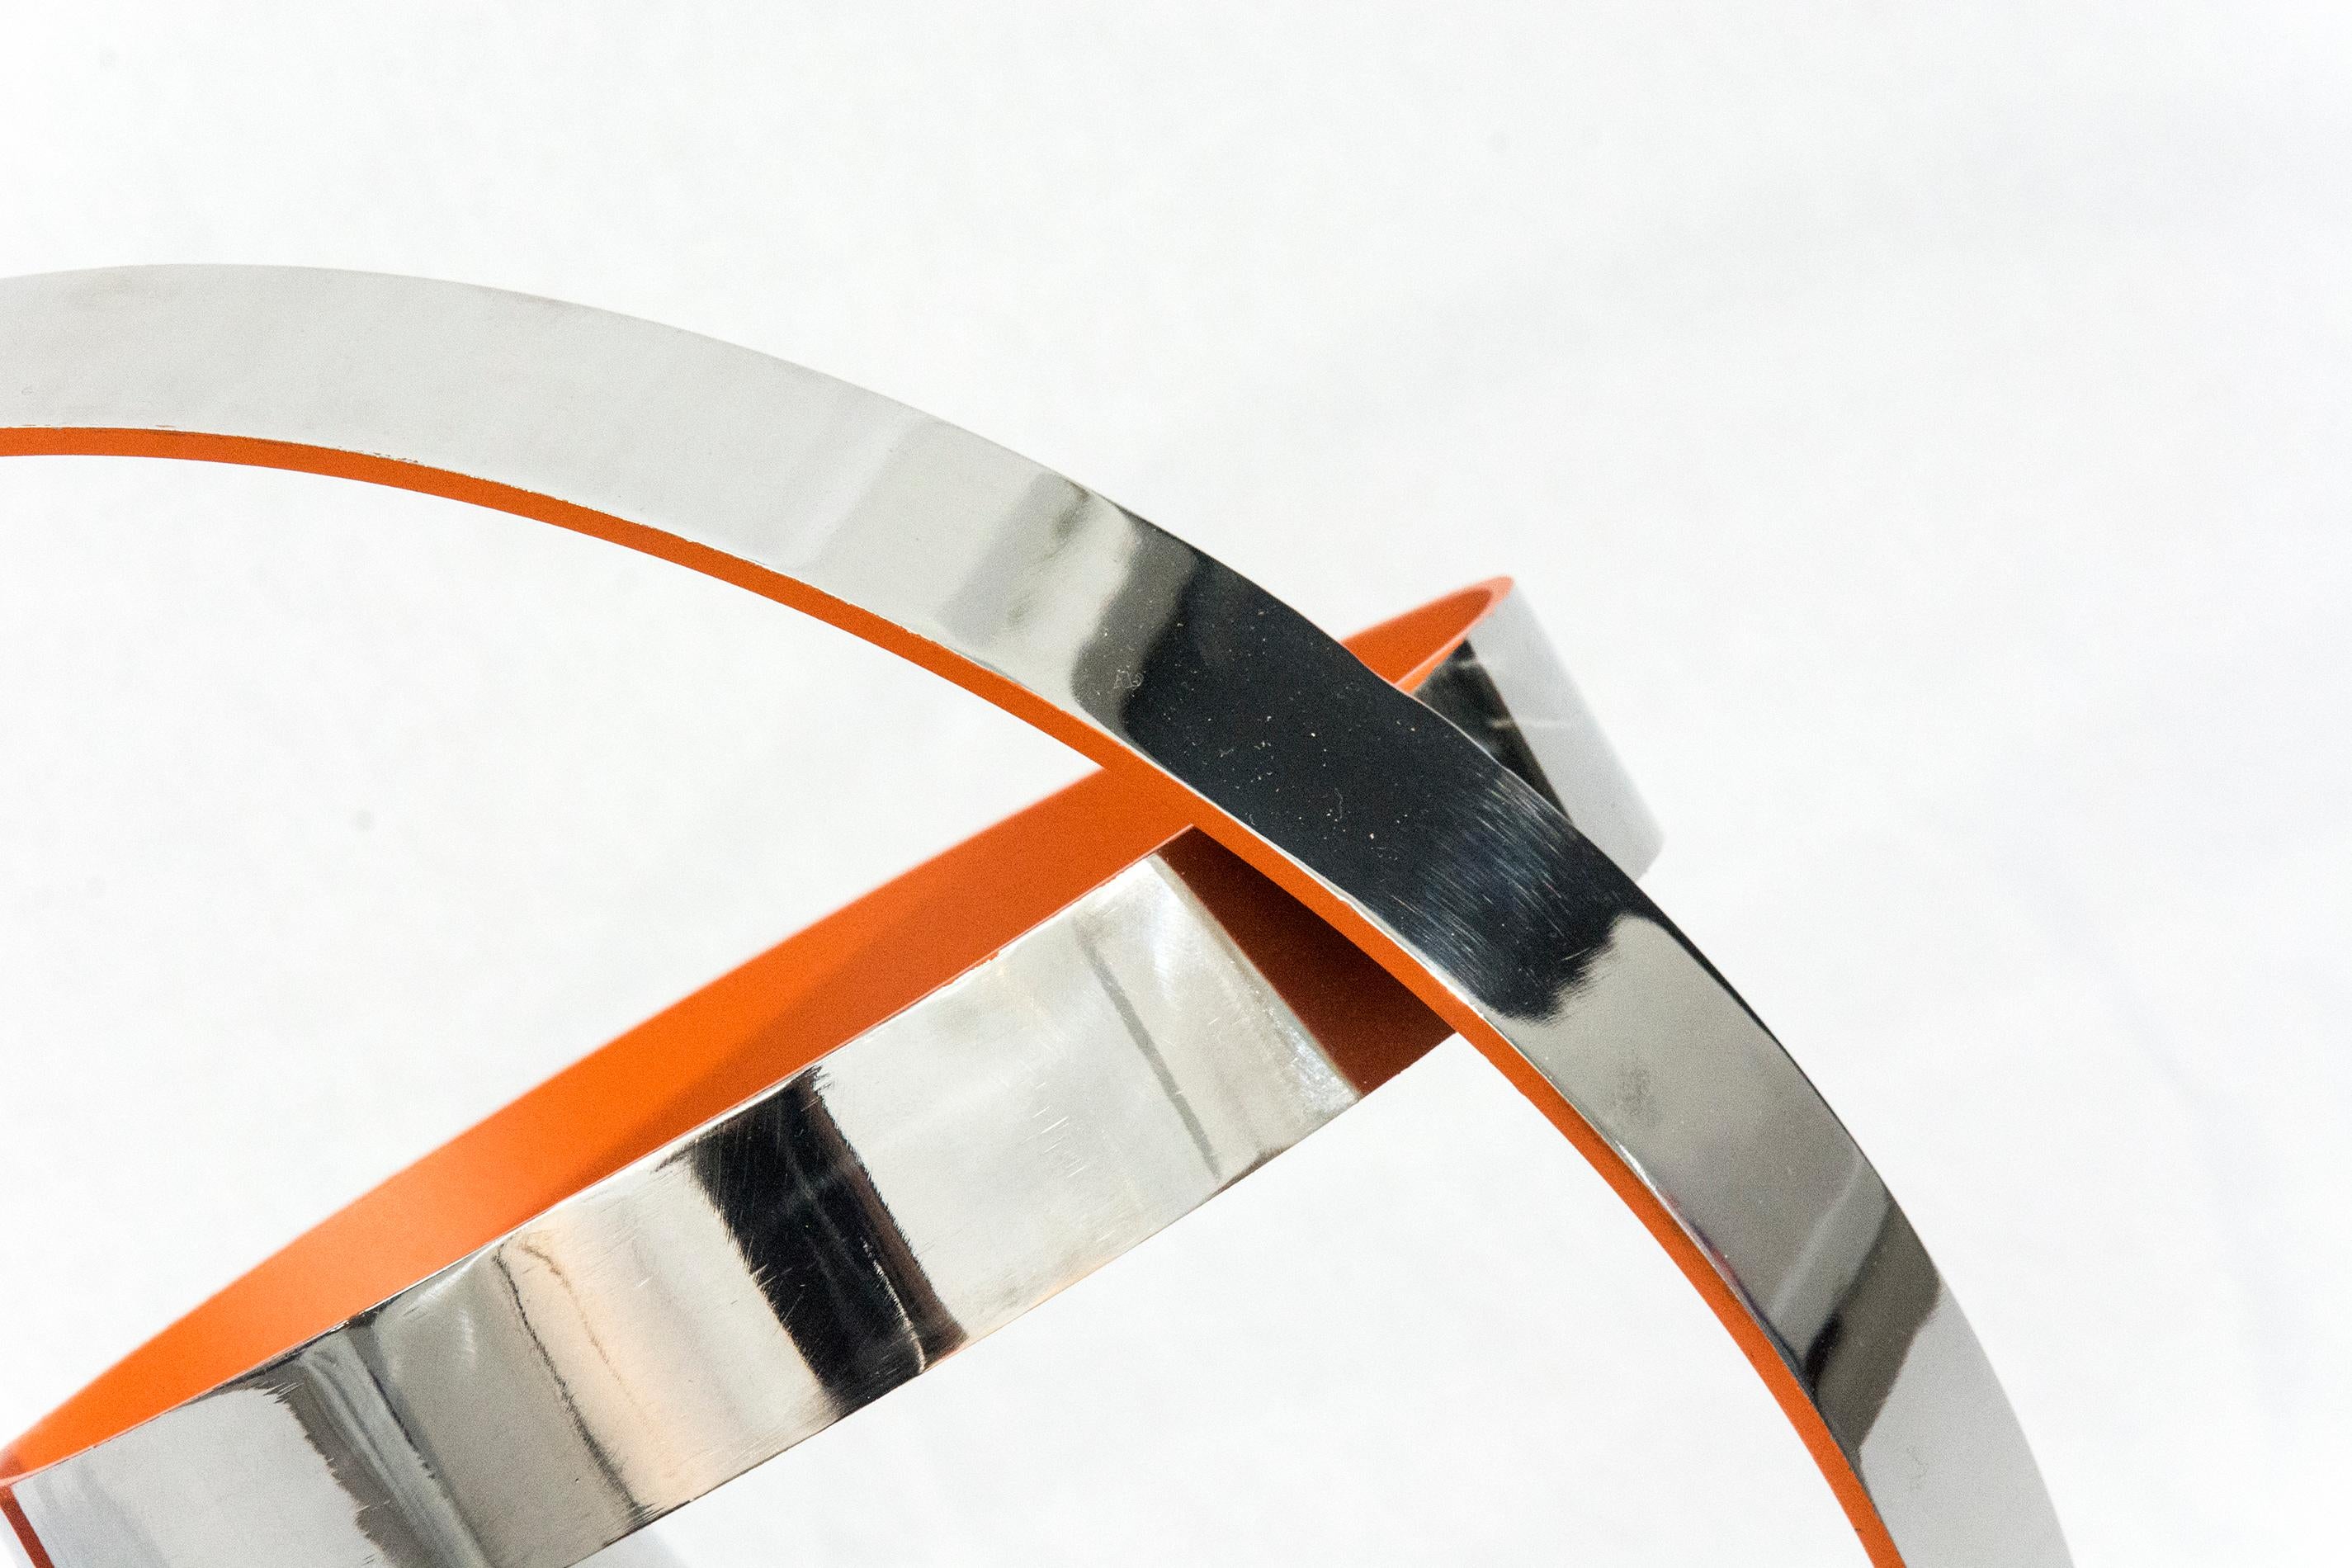 In his geometric sculptures, Philippe Pallafray intersects rings of polished stainless steel, the edges patinated in hot  orange crush. His minimalist approach is paced, cool and echoed in the series title, Temps Zero or “timeless”.  This work is